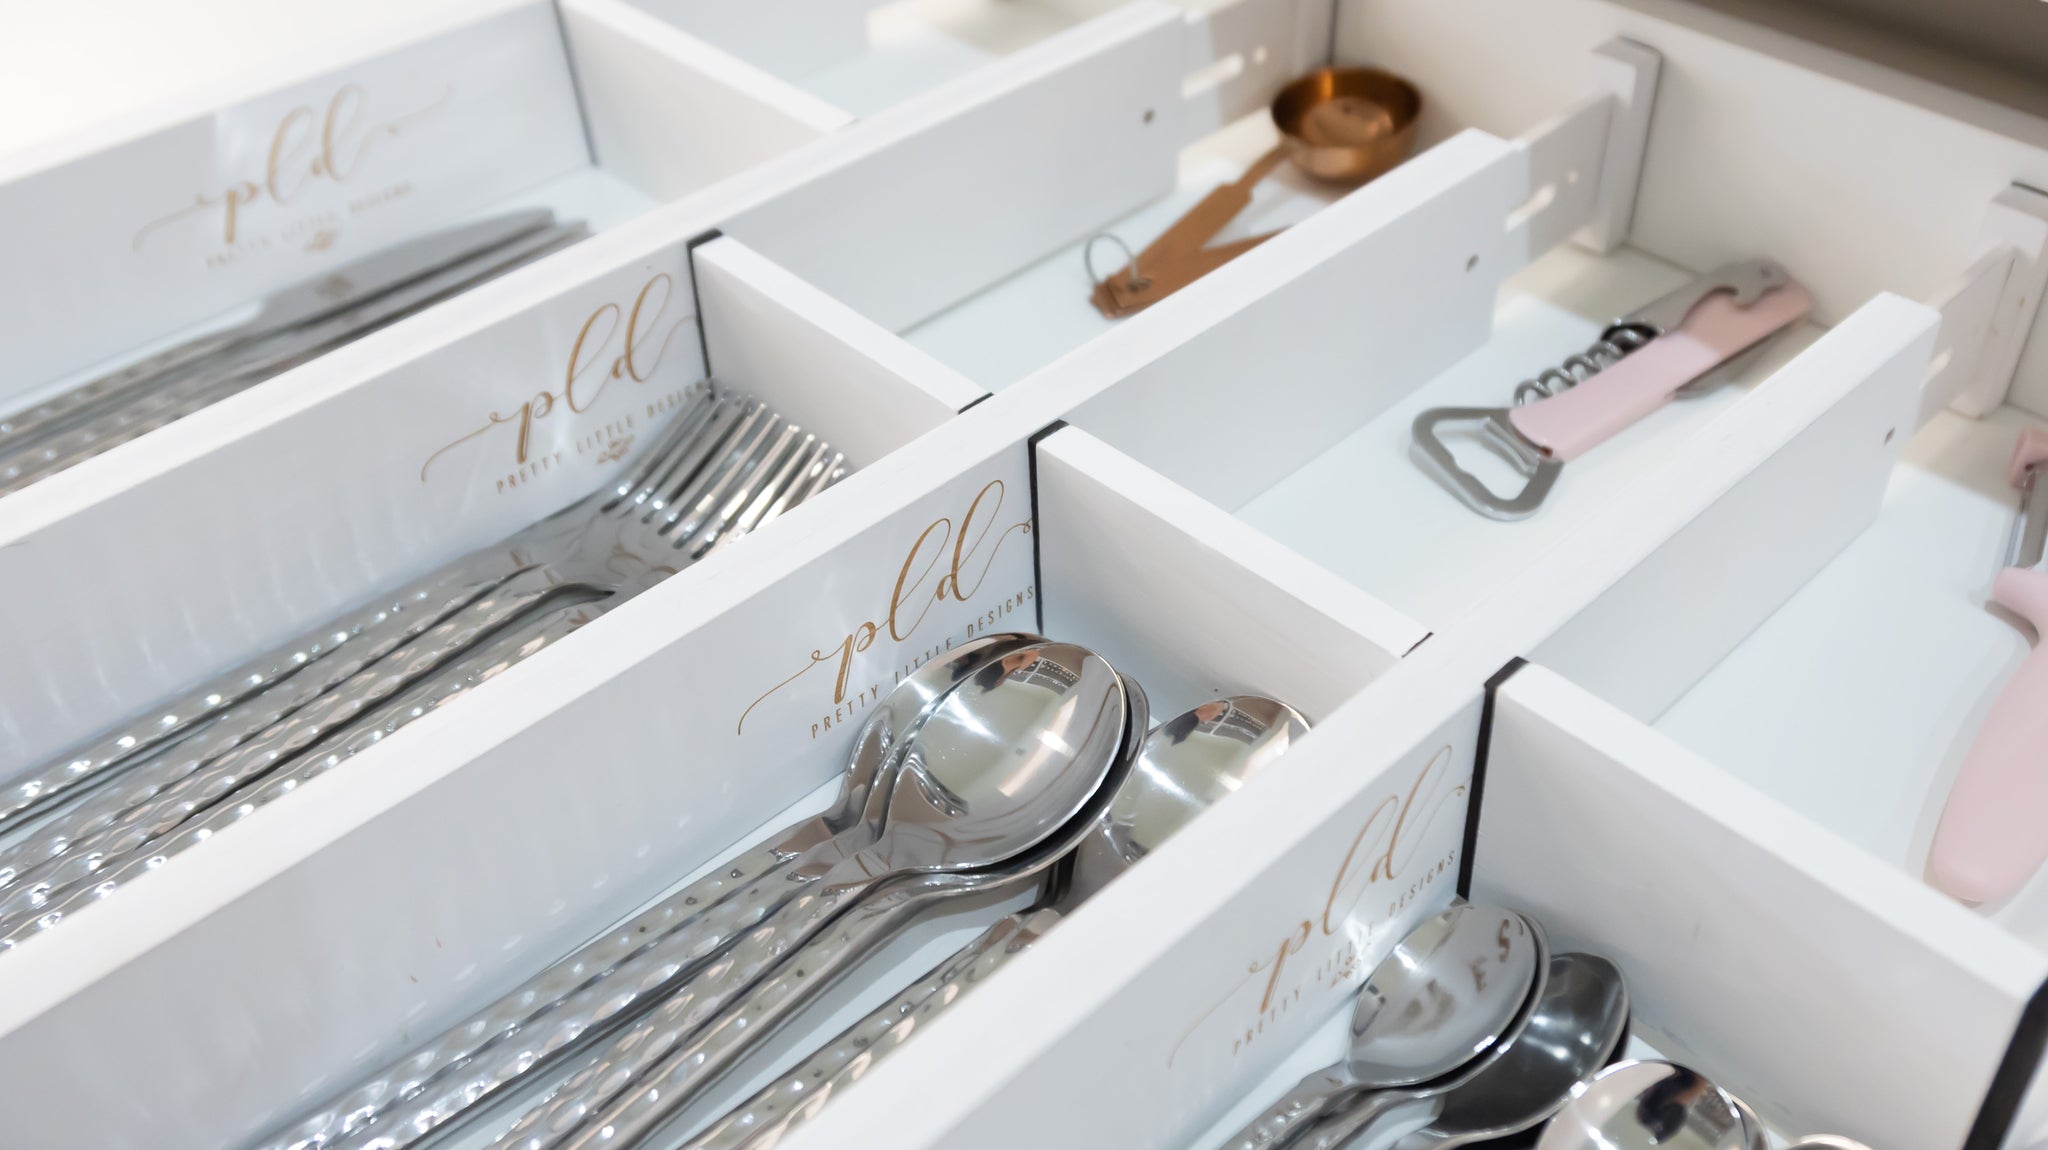 How to Organise Kitchen Cabinets and Drawers